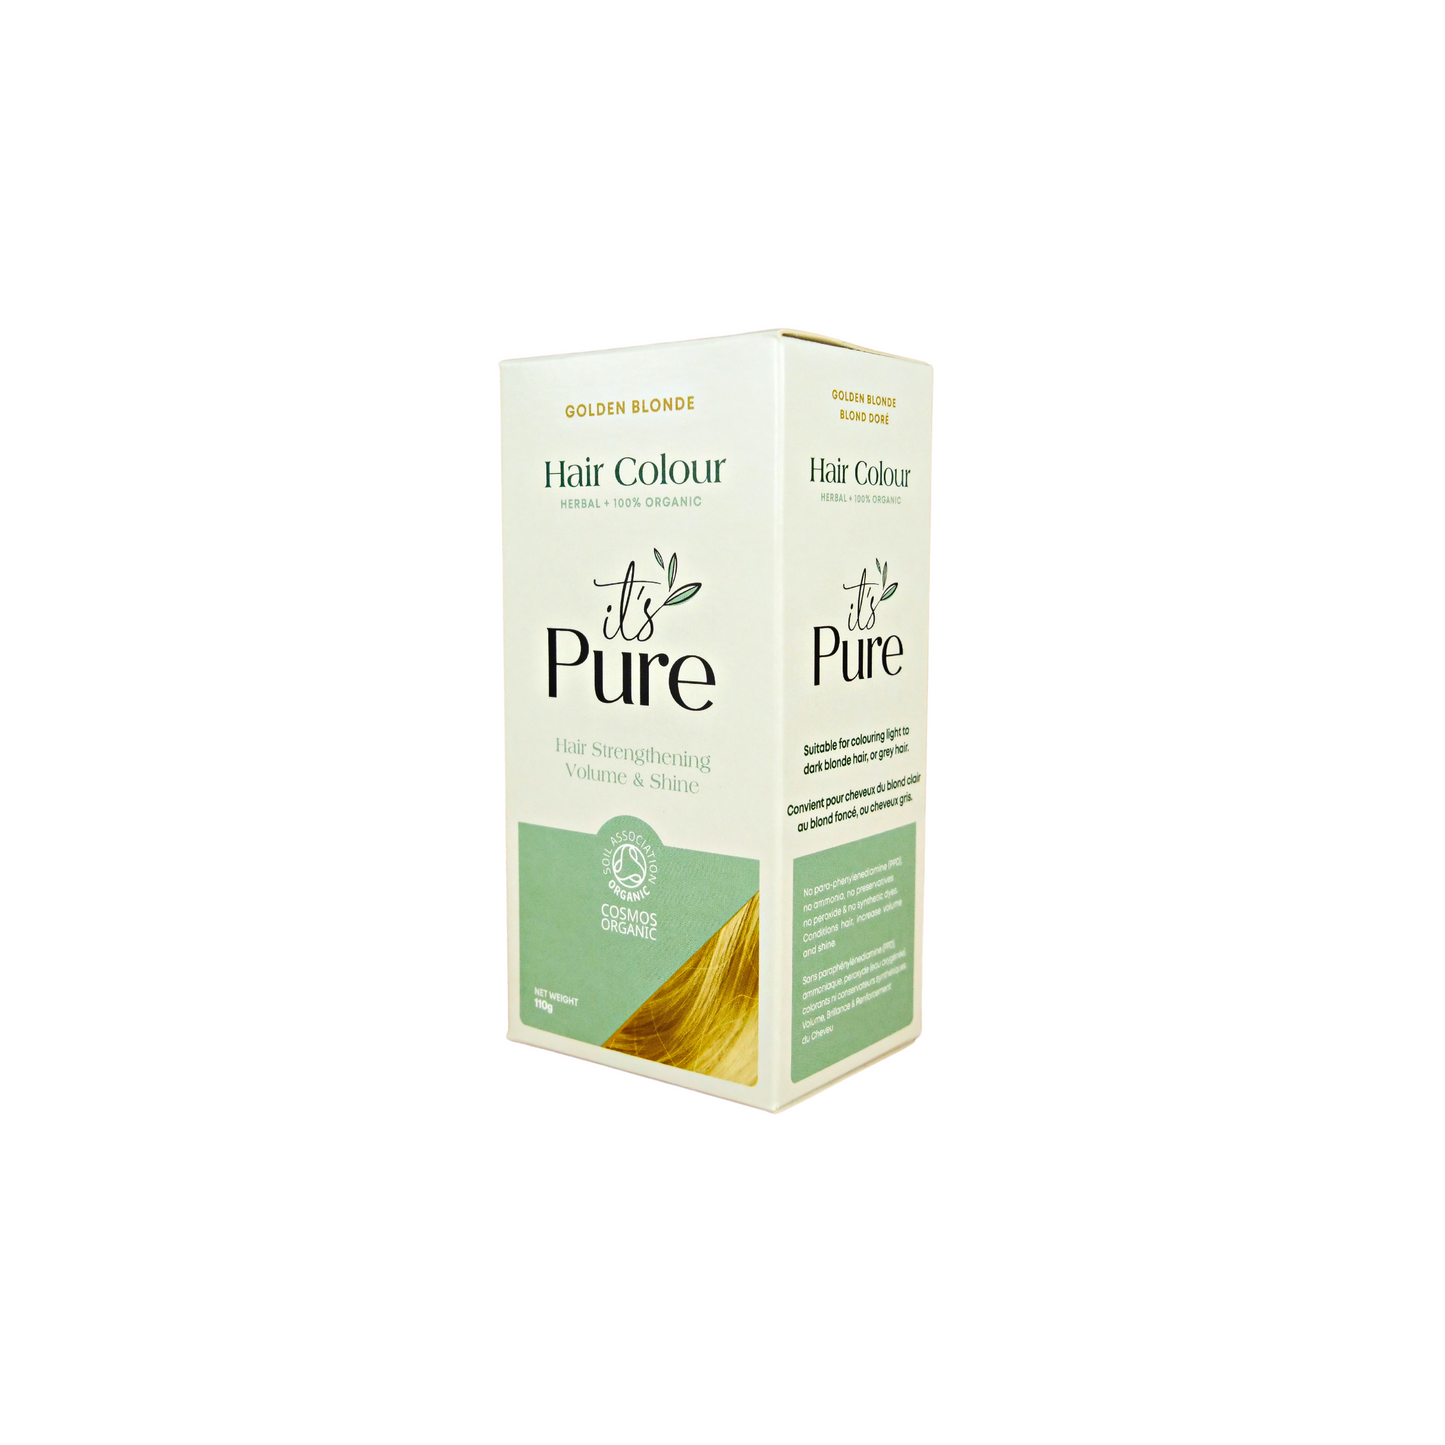 it's pure golden blonde semi permanent natural hair dye in light green and green box on white background